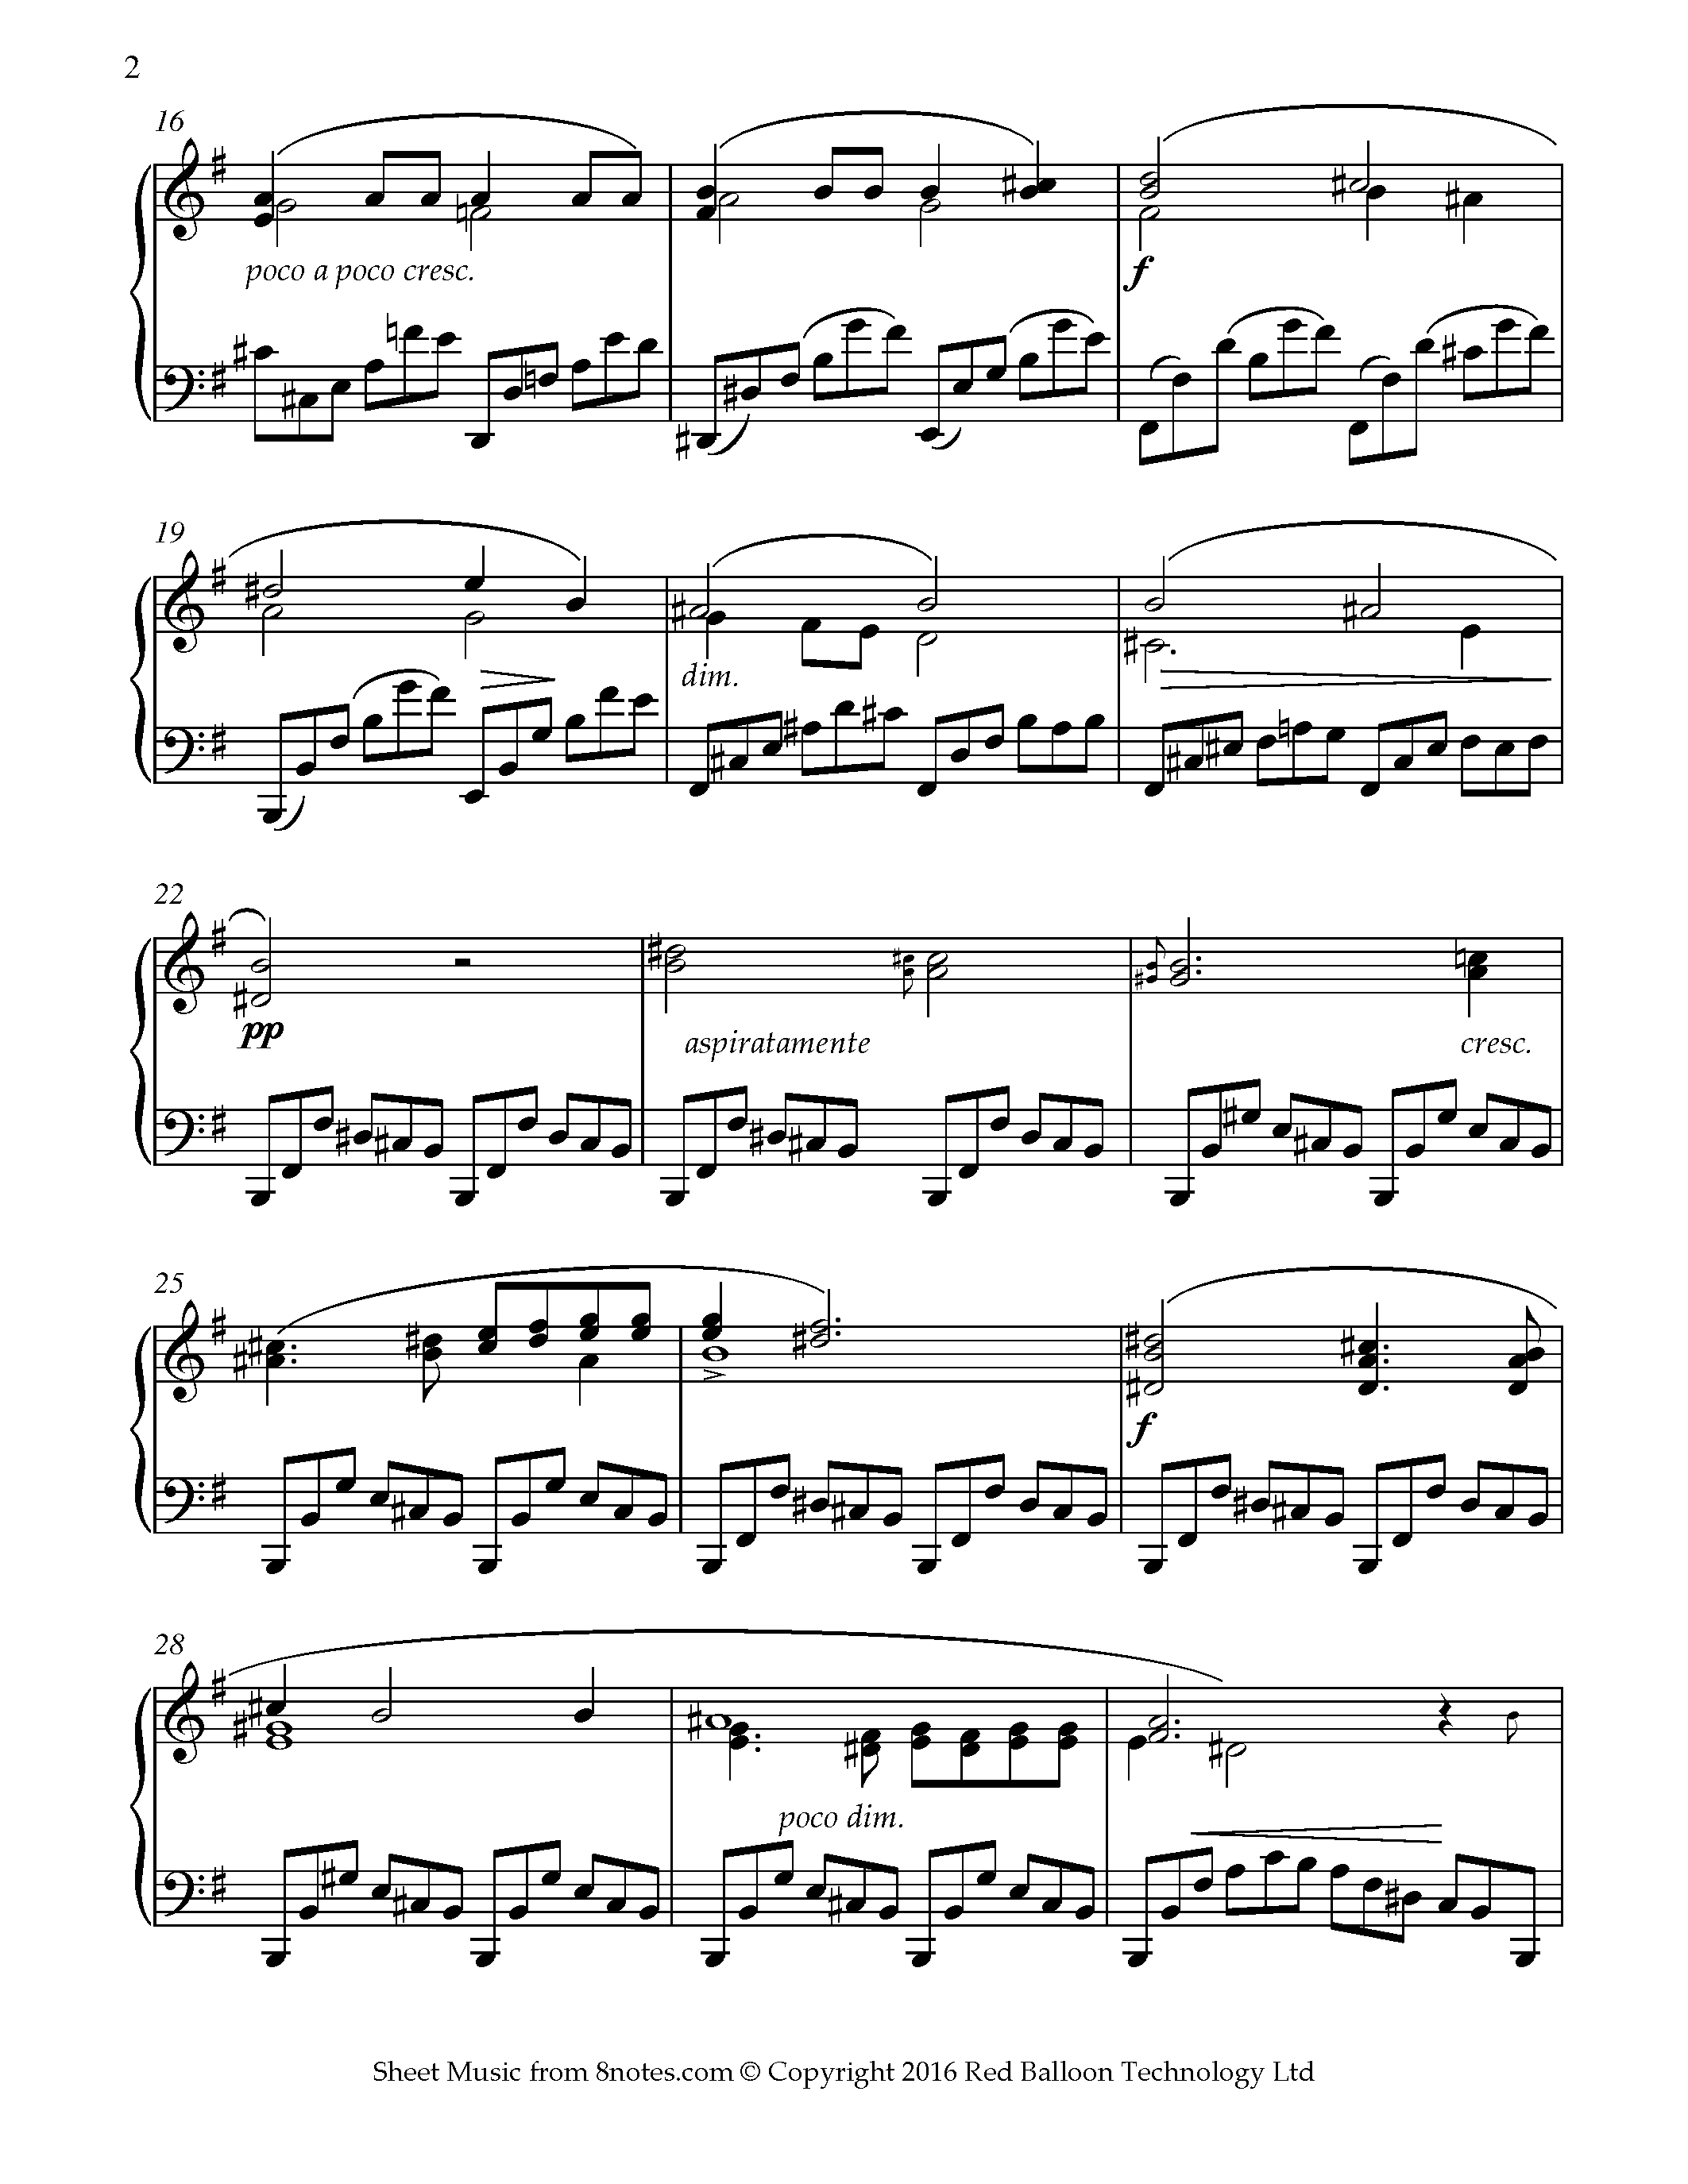 ﻿Chopin - Nocturne op.72 no.1 Sheet music for Piano - 8notes.com